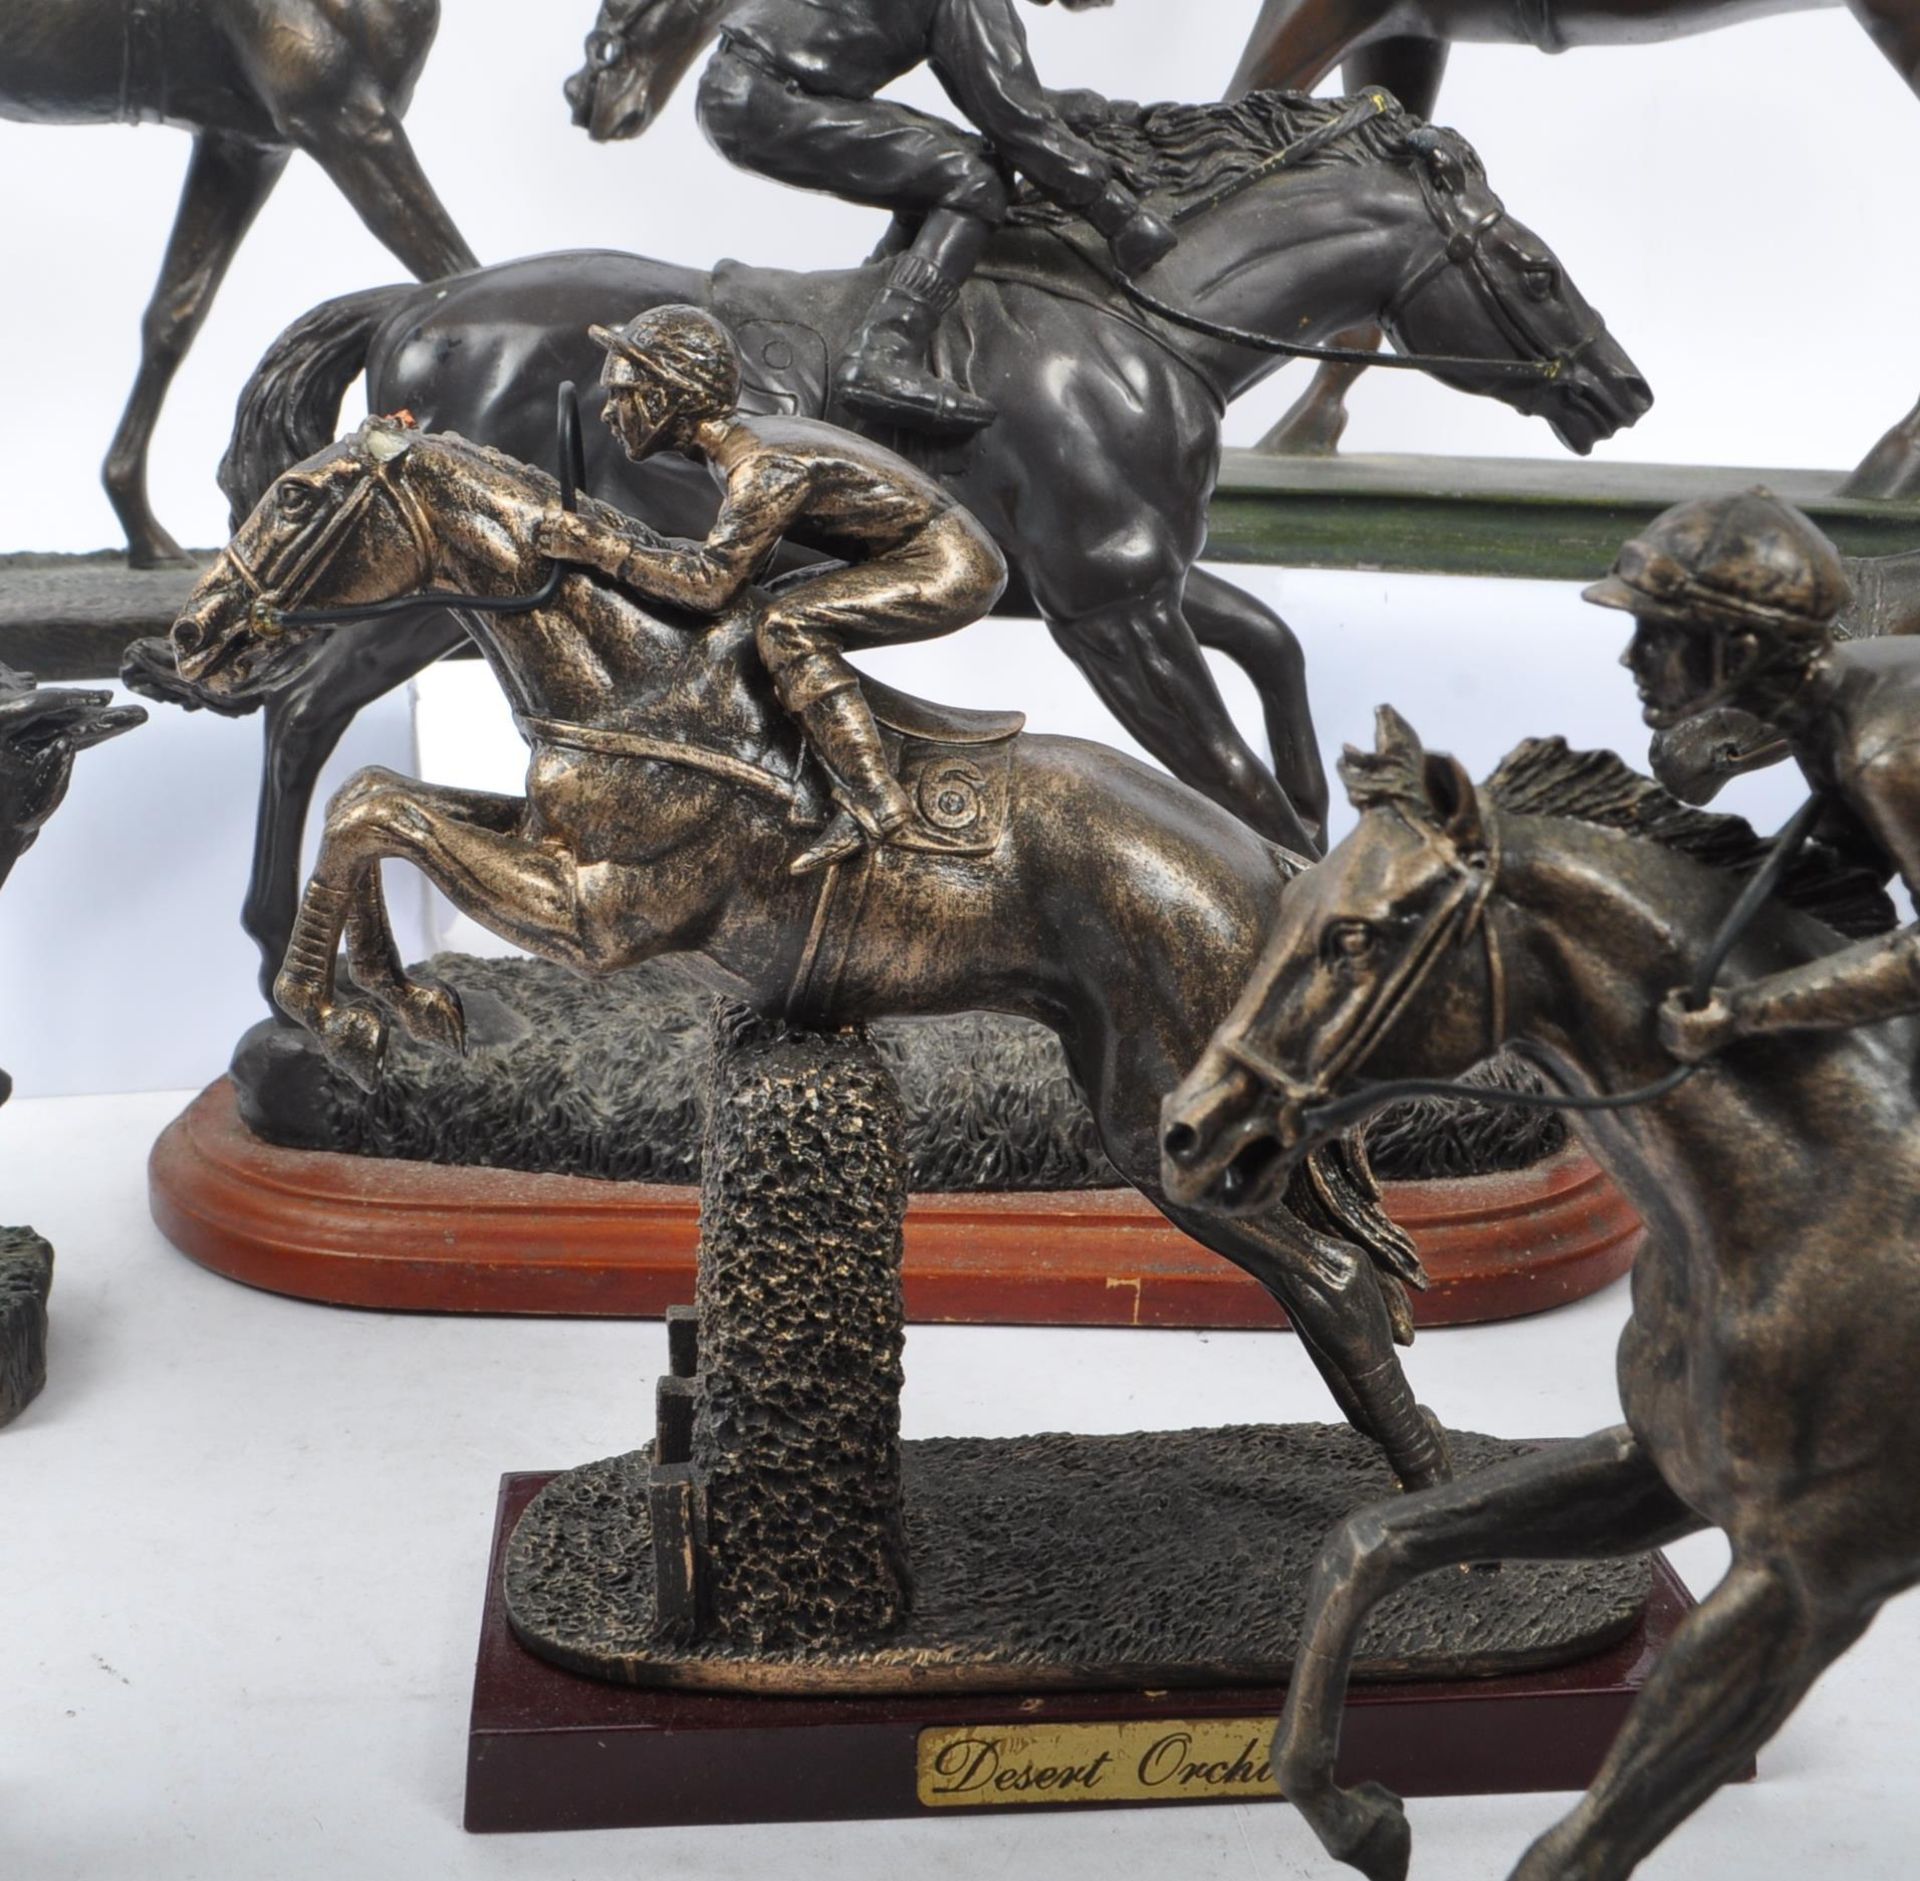 COLLECTION OF BRONZE EFFECT RACING HORSE & RIDERS FIGURES - Image 2 of 8